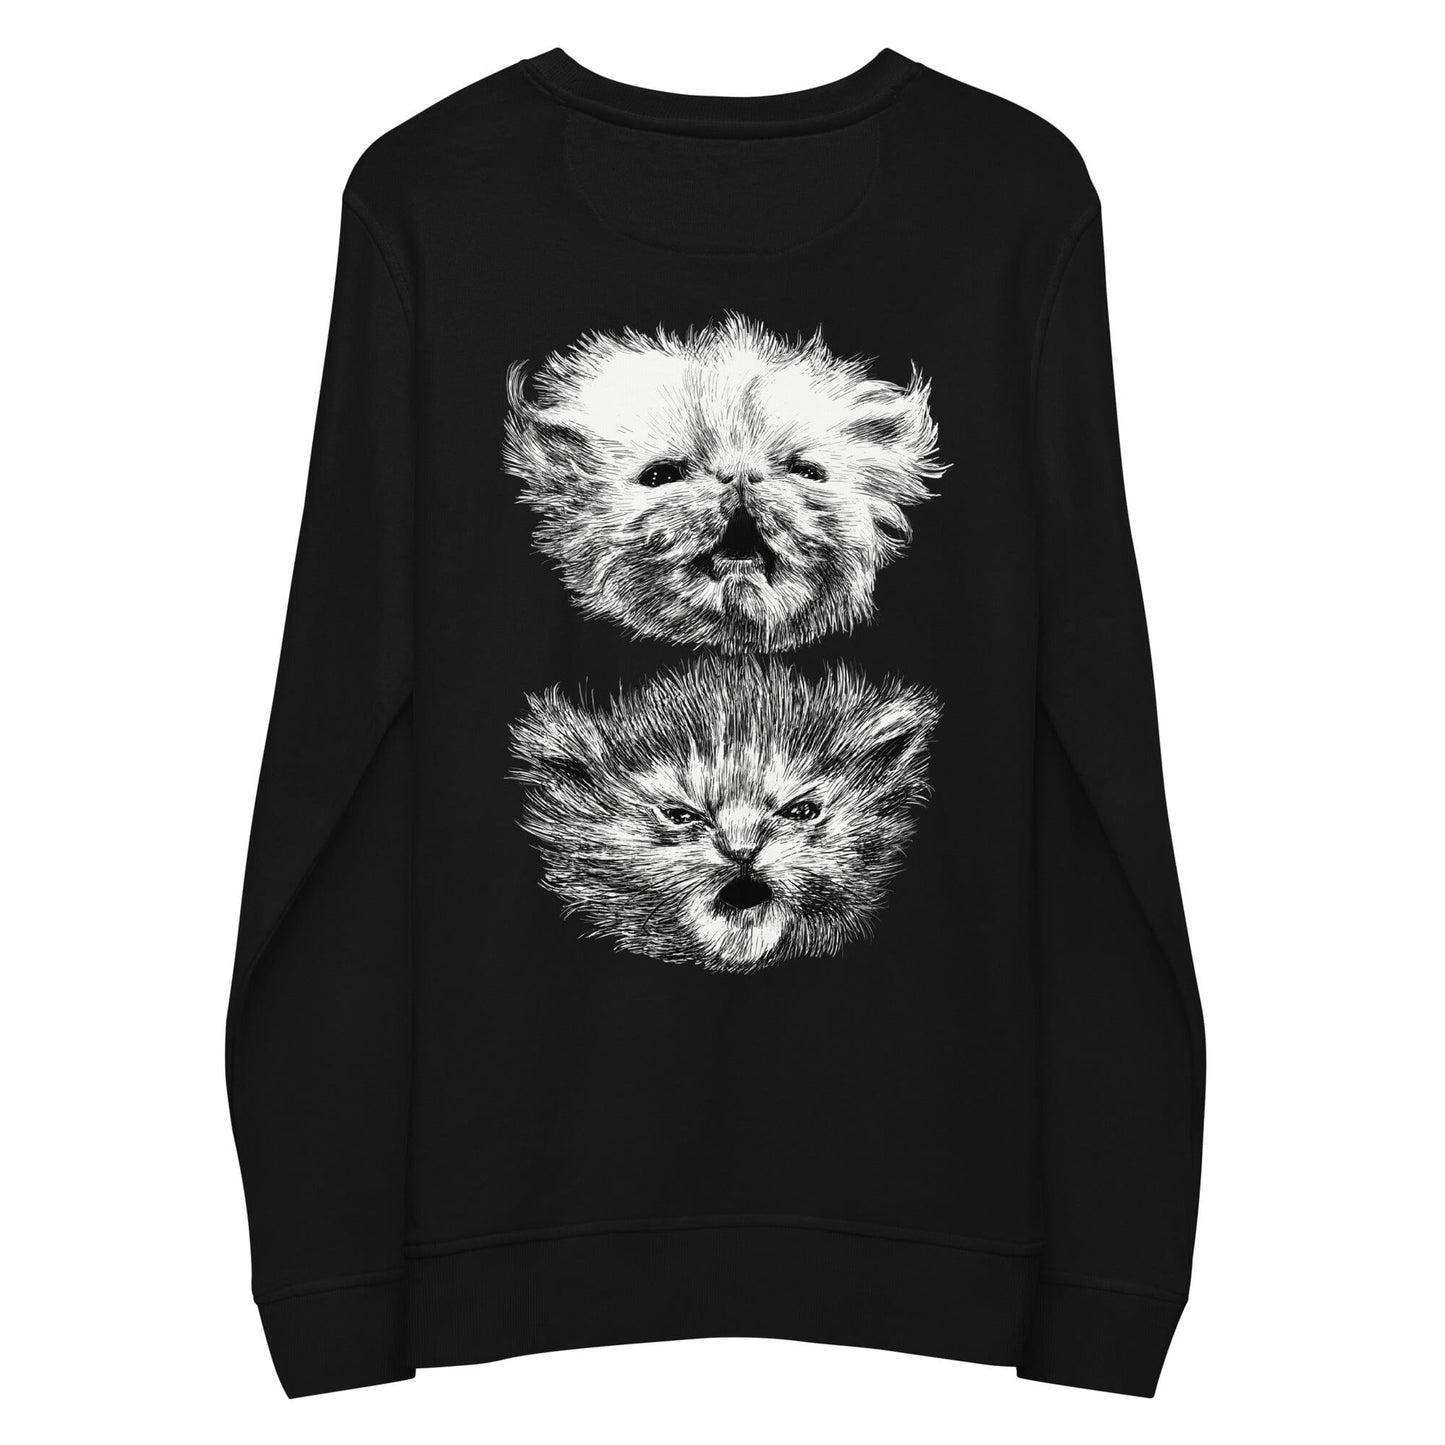 BLACK WispTot Sweatshirt [Unfoiled] (All net proceeds go to equally to Kitty CrusAIDe and Rags to Riches Animal Rescue) JoyousJoyfulJoyness 